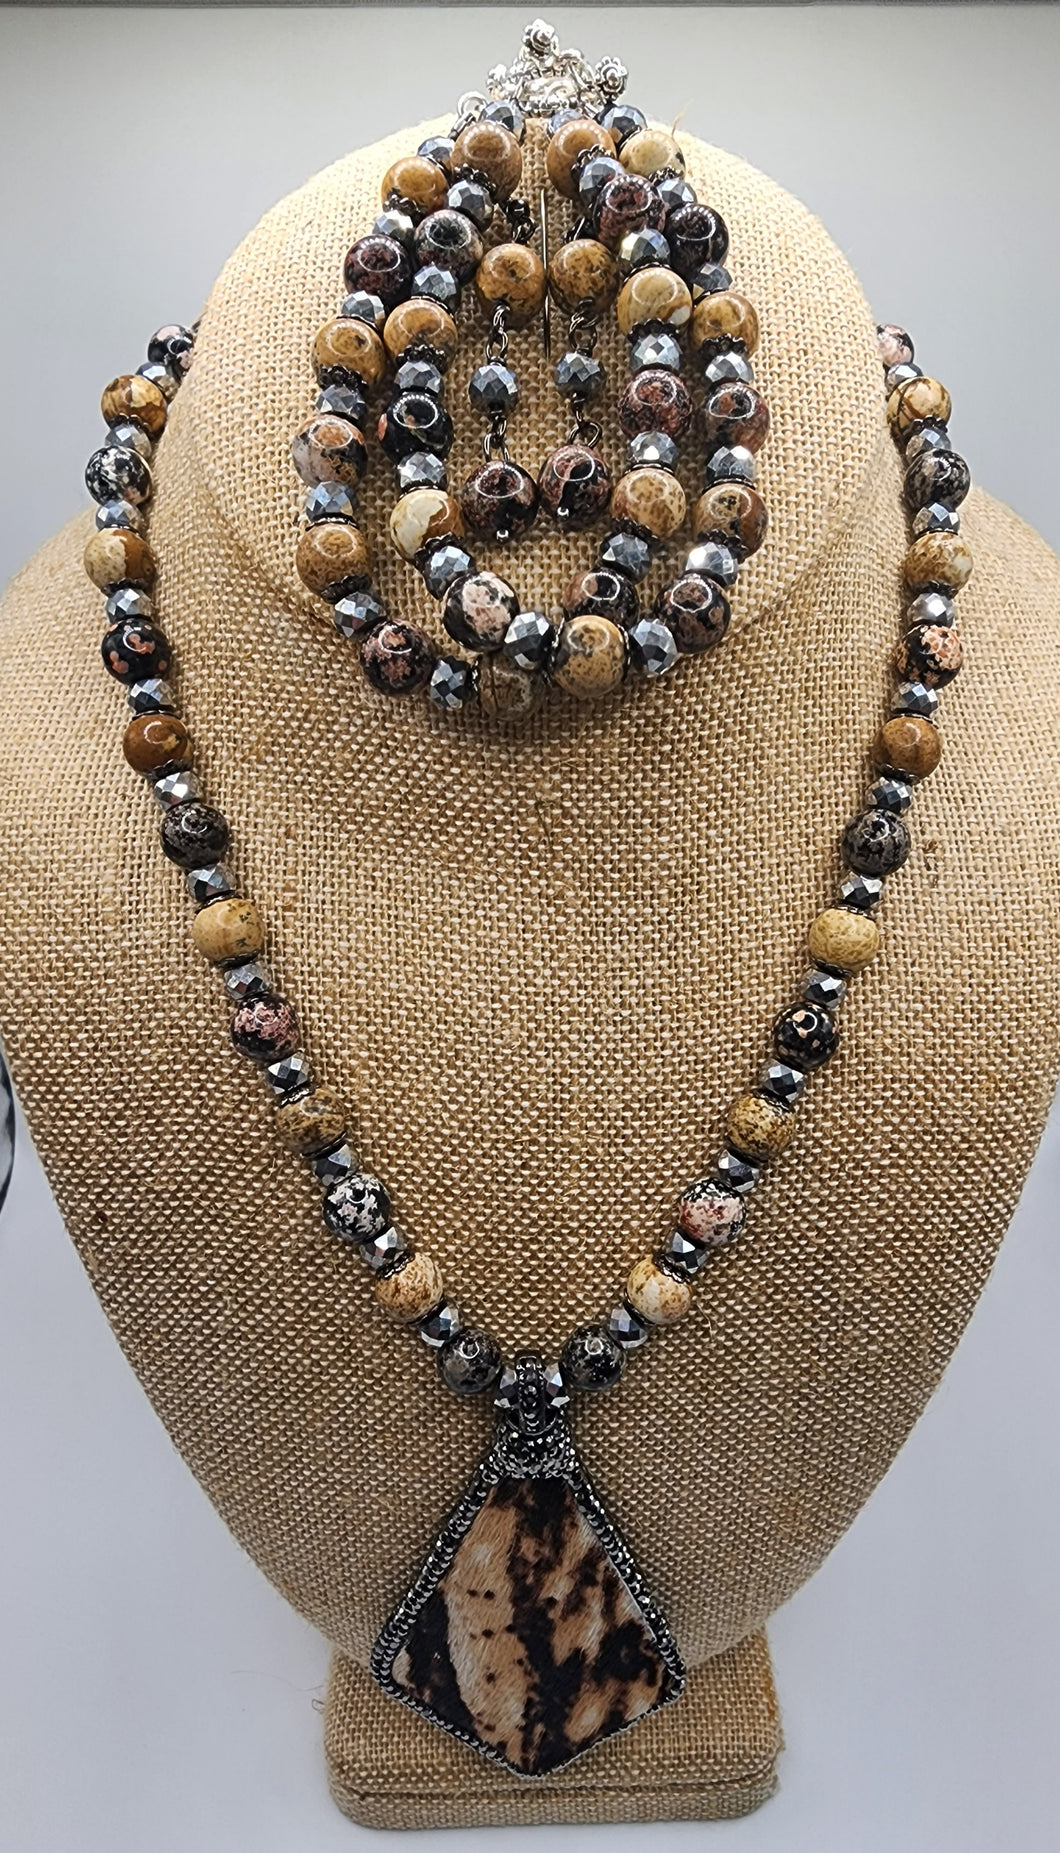 Jasper and Hematite Gemstone Beaded Necklace, Bracelet and Earring Set With Reversible Pave Embellishment Centerpiece